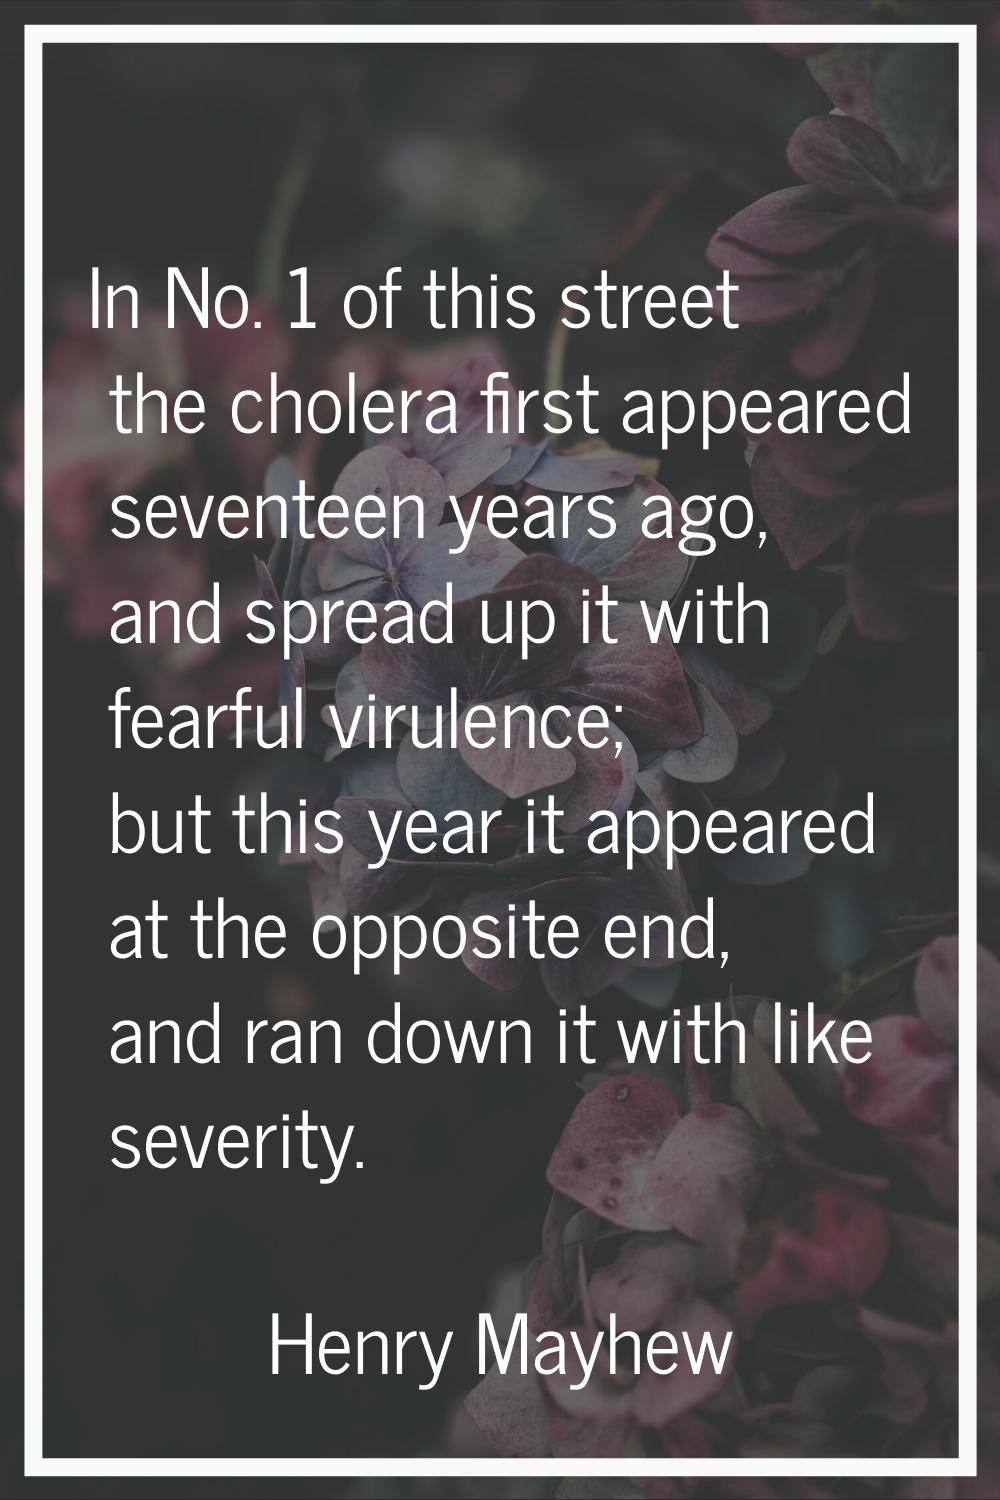 In No. 1 of this street the cholera first appeared seventeen years ago, and spread up it with fearf